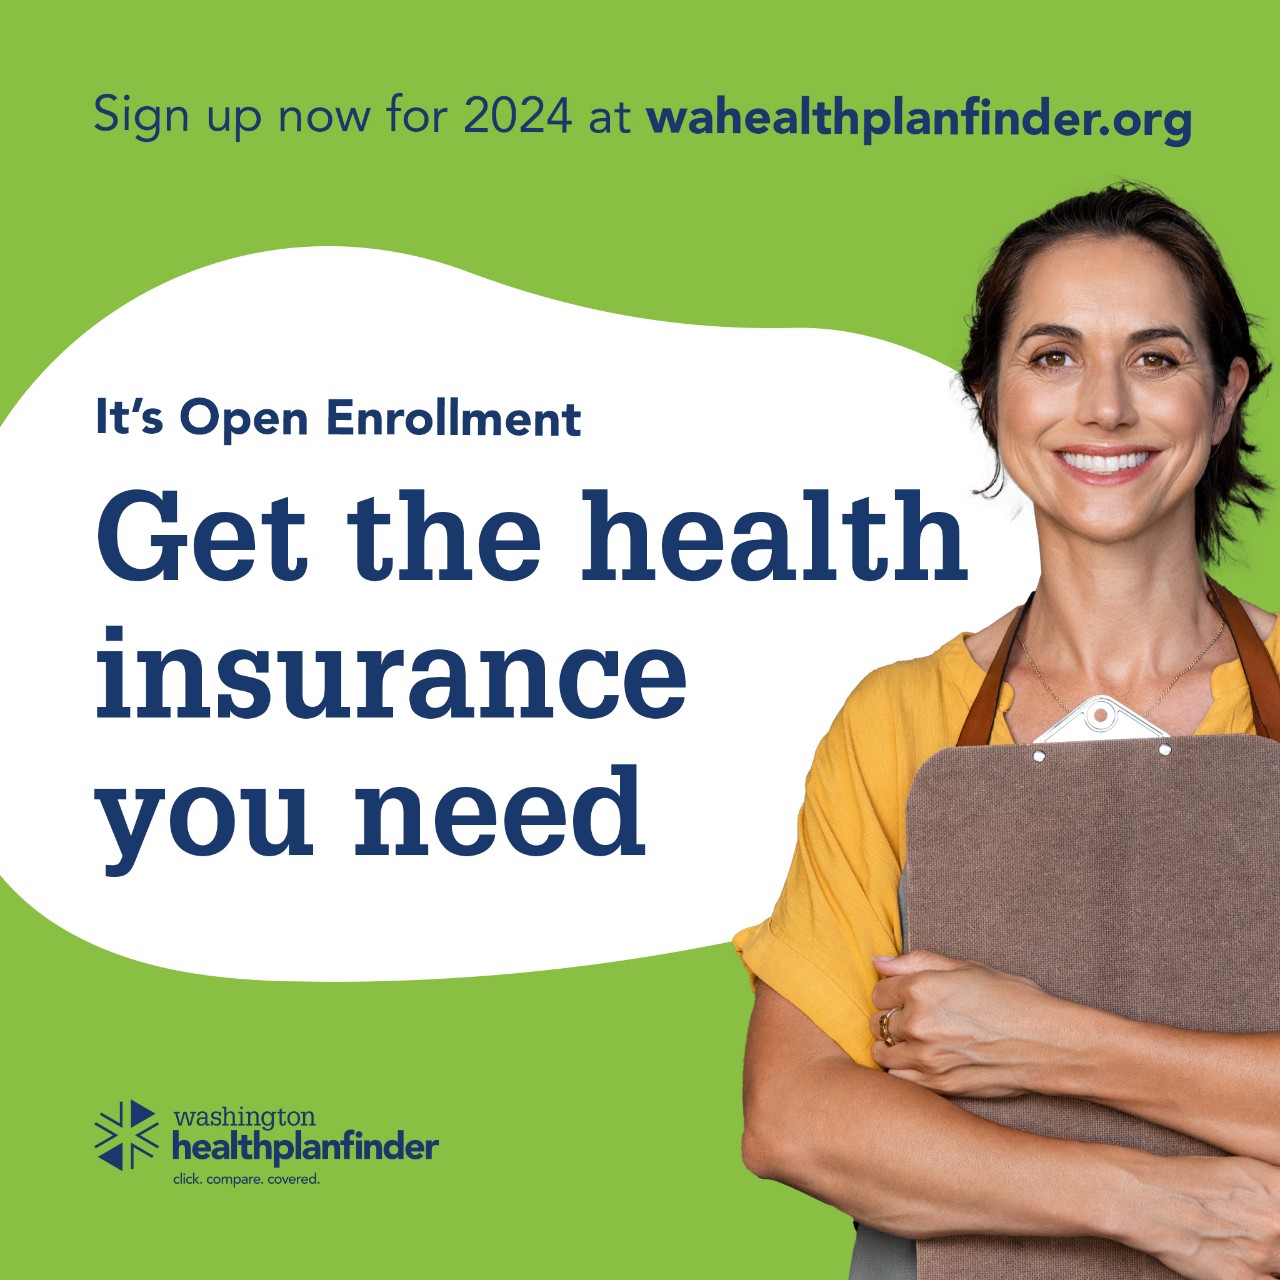 Sing up now for 2024 at wahealthplanfinder.org. It's Open Enrollment. Get the health insurance you need. Washington Healthplanfinder.